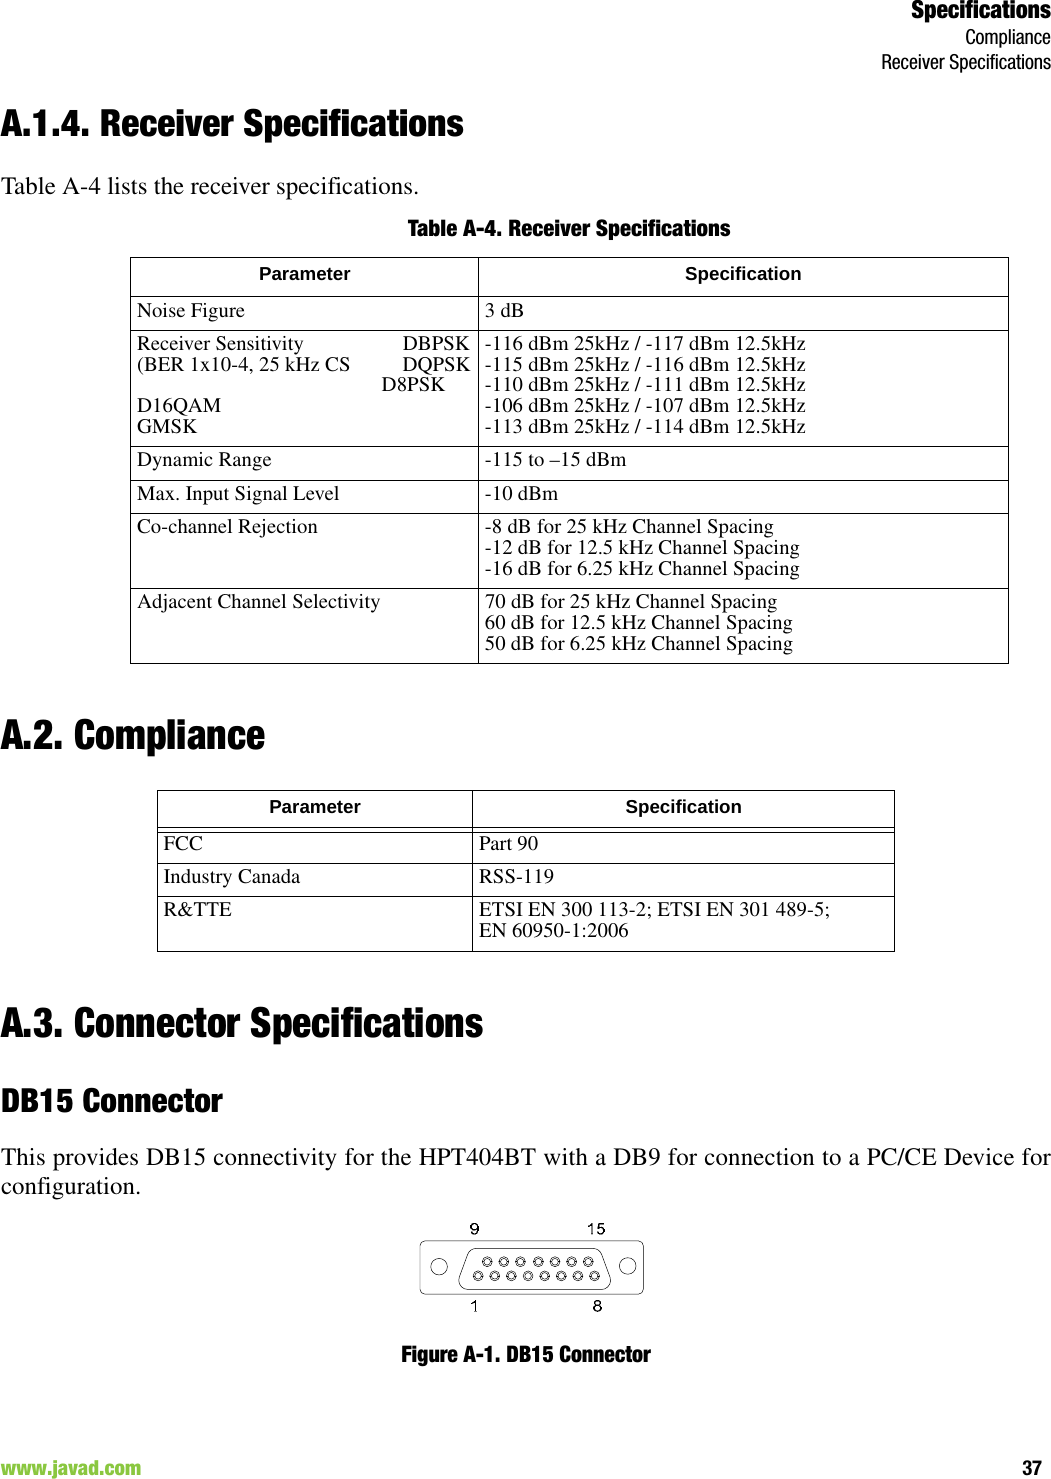 SpecificationsComplianceReceiver Specifications37www.javad.com                                                                                                                                                        A.1.4. Receiver SpecificationsTable A-4 lists the receiver specifications.Table A-4. Receiver SpecificationsA.2. ComplianceA.3. Connector SpecificationsDB15 ConnectorThis provides DB15 connectivity for the HPT404BT with a DB9 for connection to a PC/CE Device forconfiguration. Figure A-1. DB15 ConnectorParameter SpecificationNoise Figure 3 dBReceiver Sensitivity                   DBPSK(BER 1x10-4, 25 kHz CS          DQPSK                                               D8PSKD16QAMGMSK-116 dBm 25kHz / -117 dBm 12.5kHz-115 dBm 25kHz / -116 dBm 12.5kHz-110 dBm 25kHz / -111 dBm 12.5kHz-106 dBm 25kHz / -107 dBm 12.5kHz-113 dBm 25kHz / -114 dBm 12.5kHzDynamic Range -115 to –15 dBmMax. Input Signal Level -10 dBmCo-channel Rejection -8 dB for 25 kHz Channel Spacing-12 dB for 12.5 kHz Channel Spacing-16 dB for 6.25 kHz Channel SpacingAdjacent Channel Selectivity 70 dB for 25 kHz Channel Spacing60 dB for 12.5 kHz Channel Spacing50 dB for 6.25 kHz Channel SpacingParameter SpecificationFCC Part 90 Industry Canada RSS-119R&amp;TTE ETSI EN 300 113-2; ETSI EN 301 489-5; EN 60950-1:2006